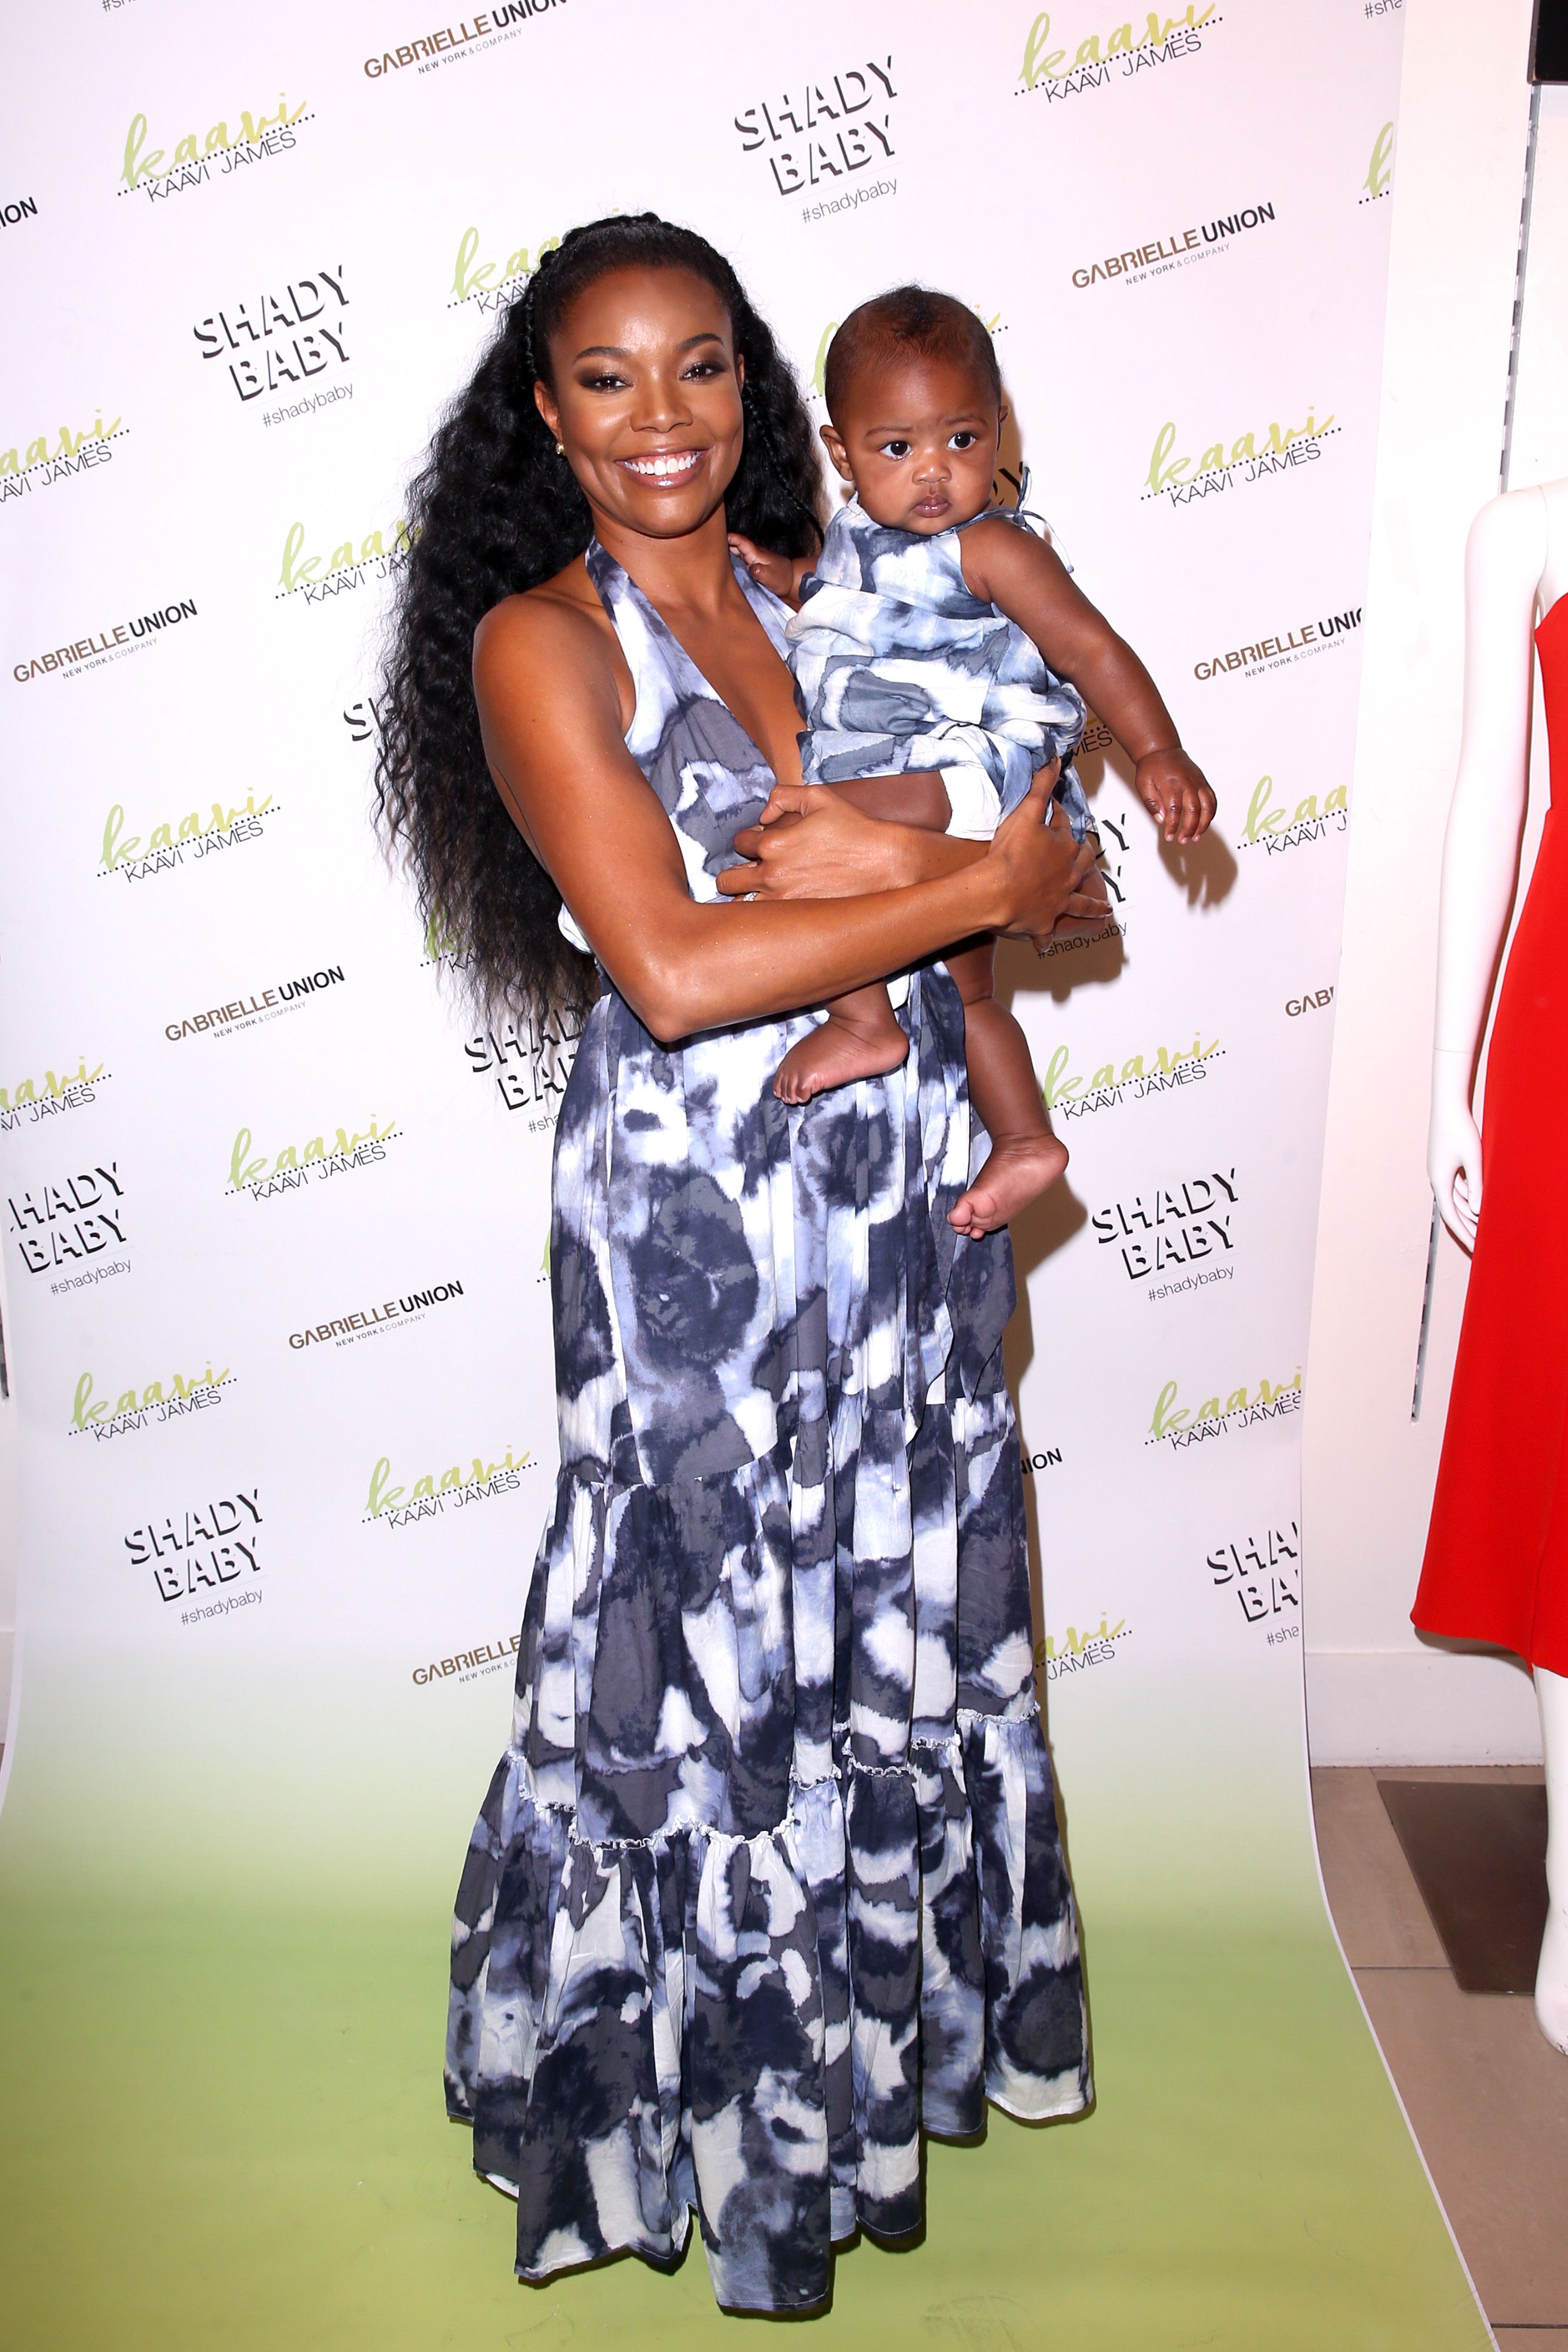 Gabrielle Union and Kaavia James Union Wade at the New York & Company Store in Burbank, CA to launch Kaavia James Collection on May 09, 2019. | Source: Getty Images